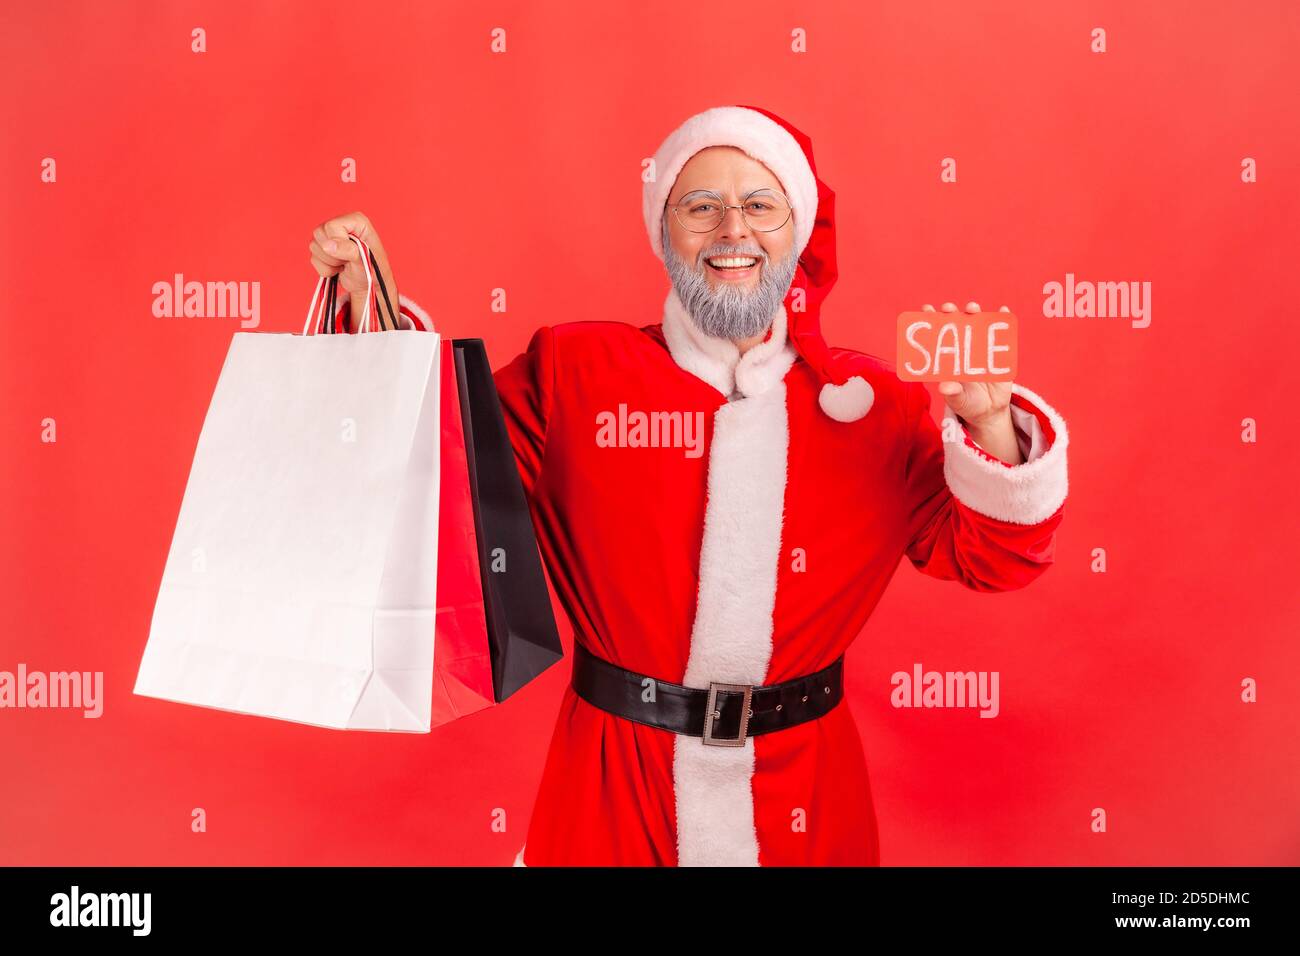 Happy joyful santa claus holding and showing sale card and colorful paper bags looking at camera with toothy smile, satisfied with holidays discounts. Stock Photo